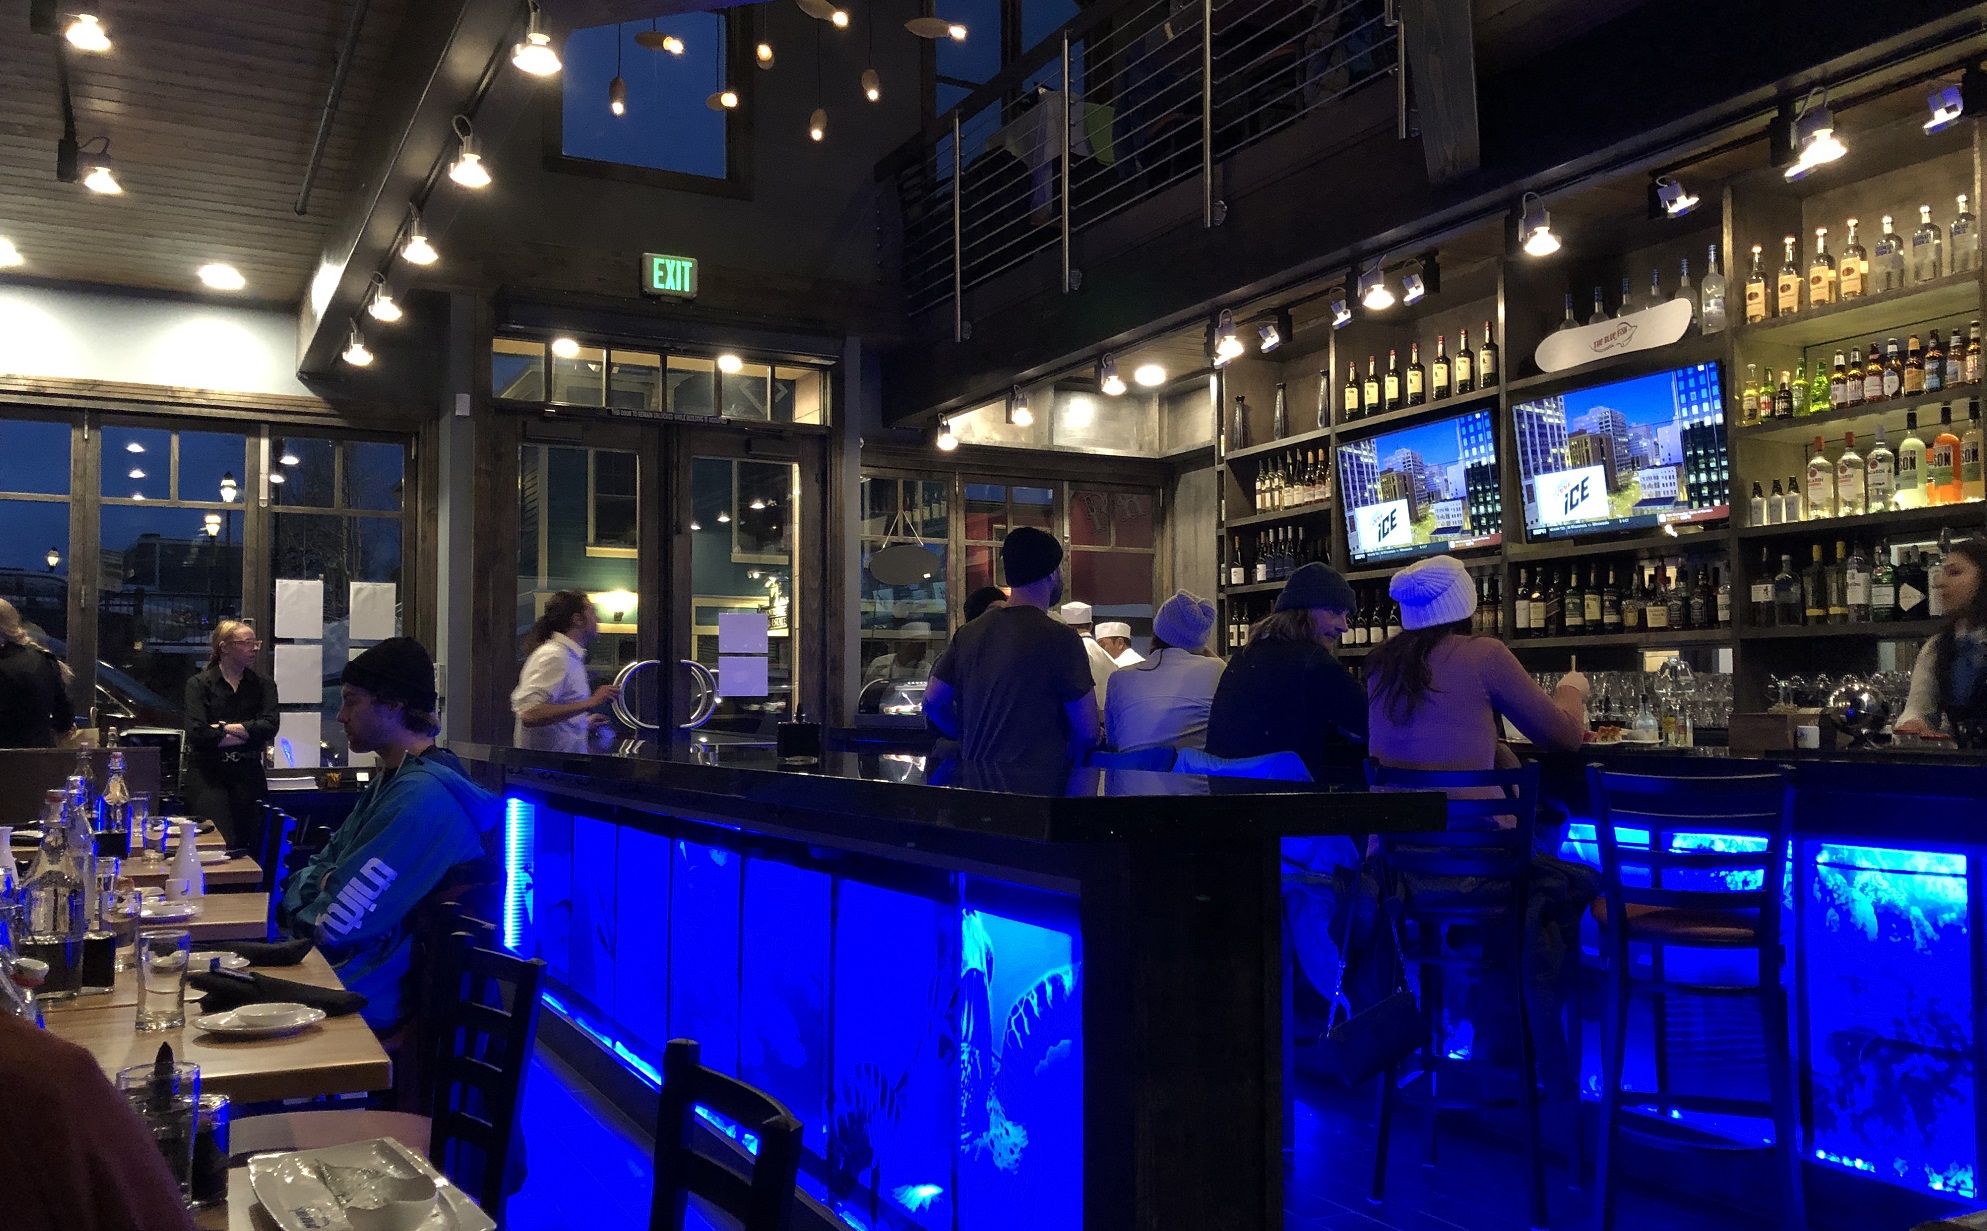 The Blue Fish in Breckenridge: bar area and lights